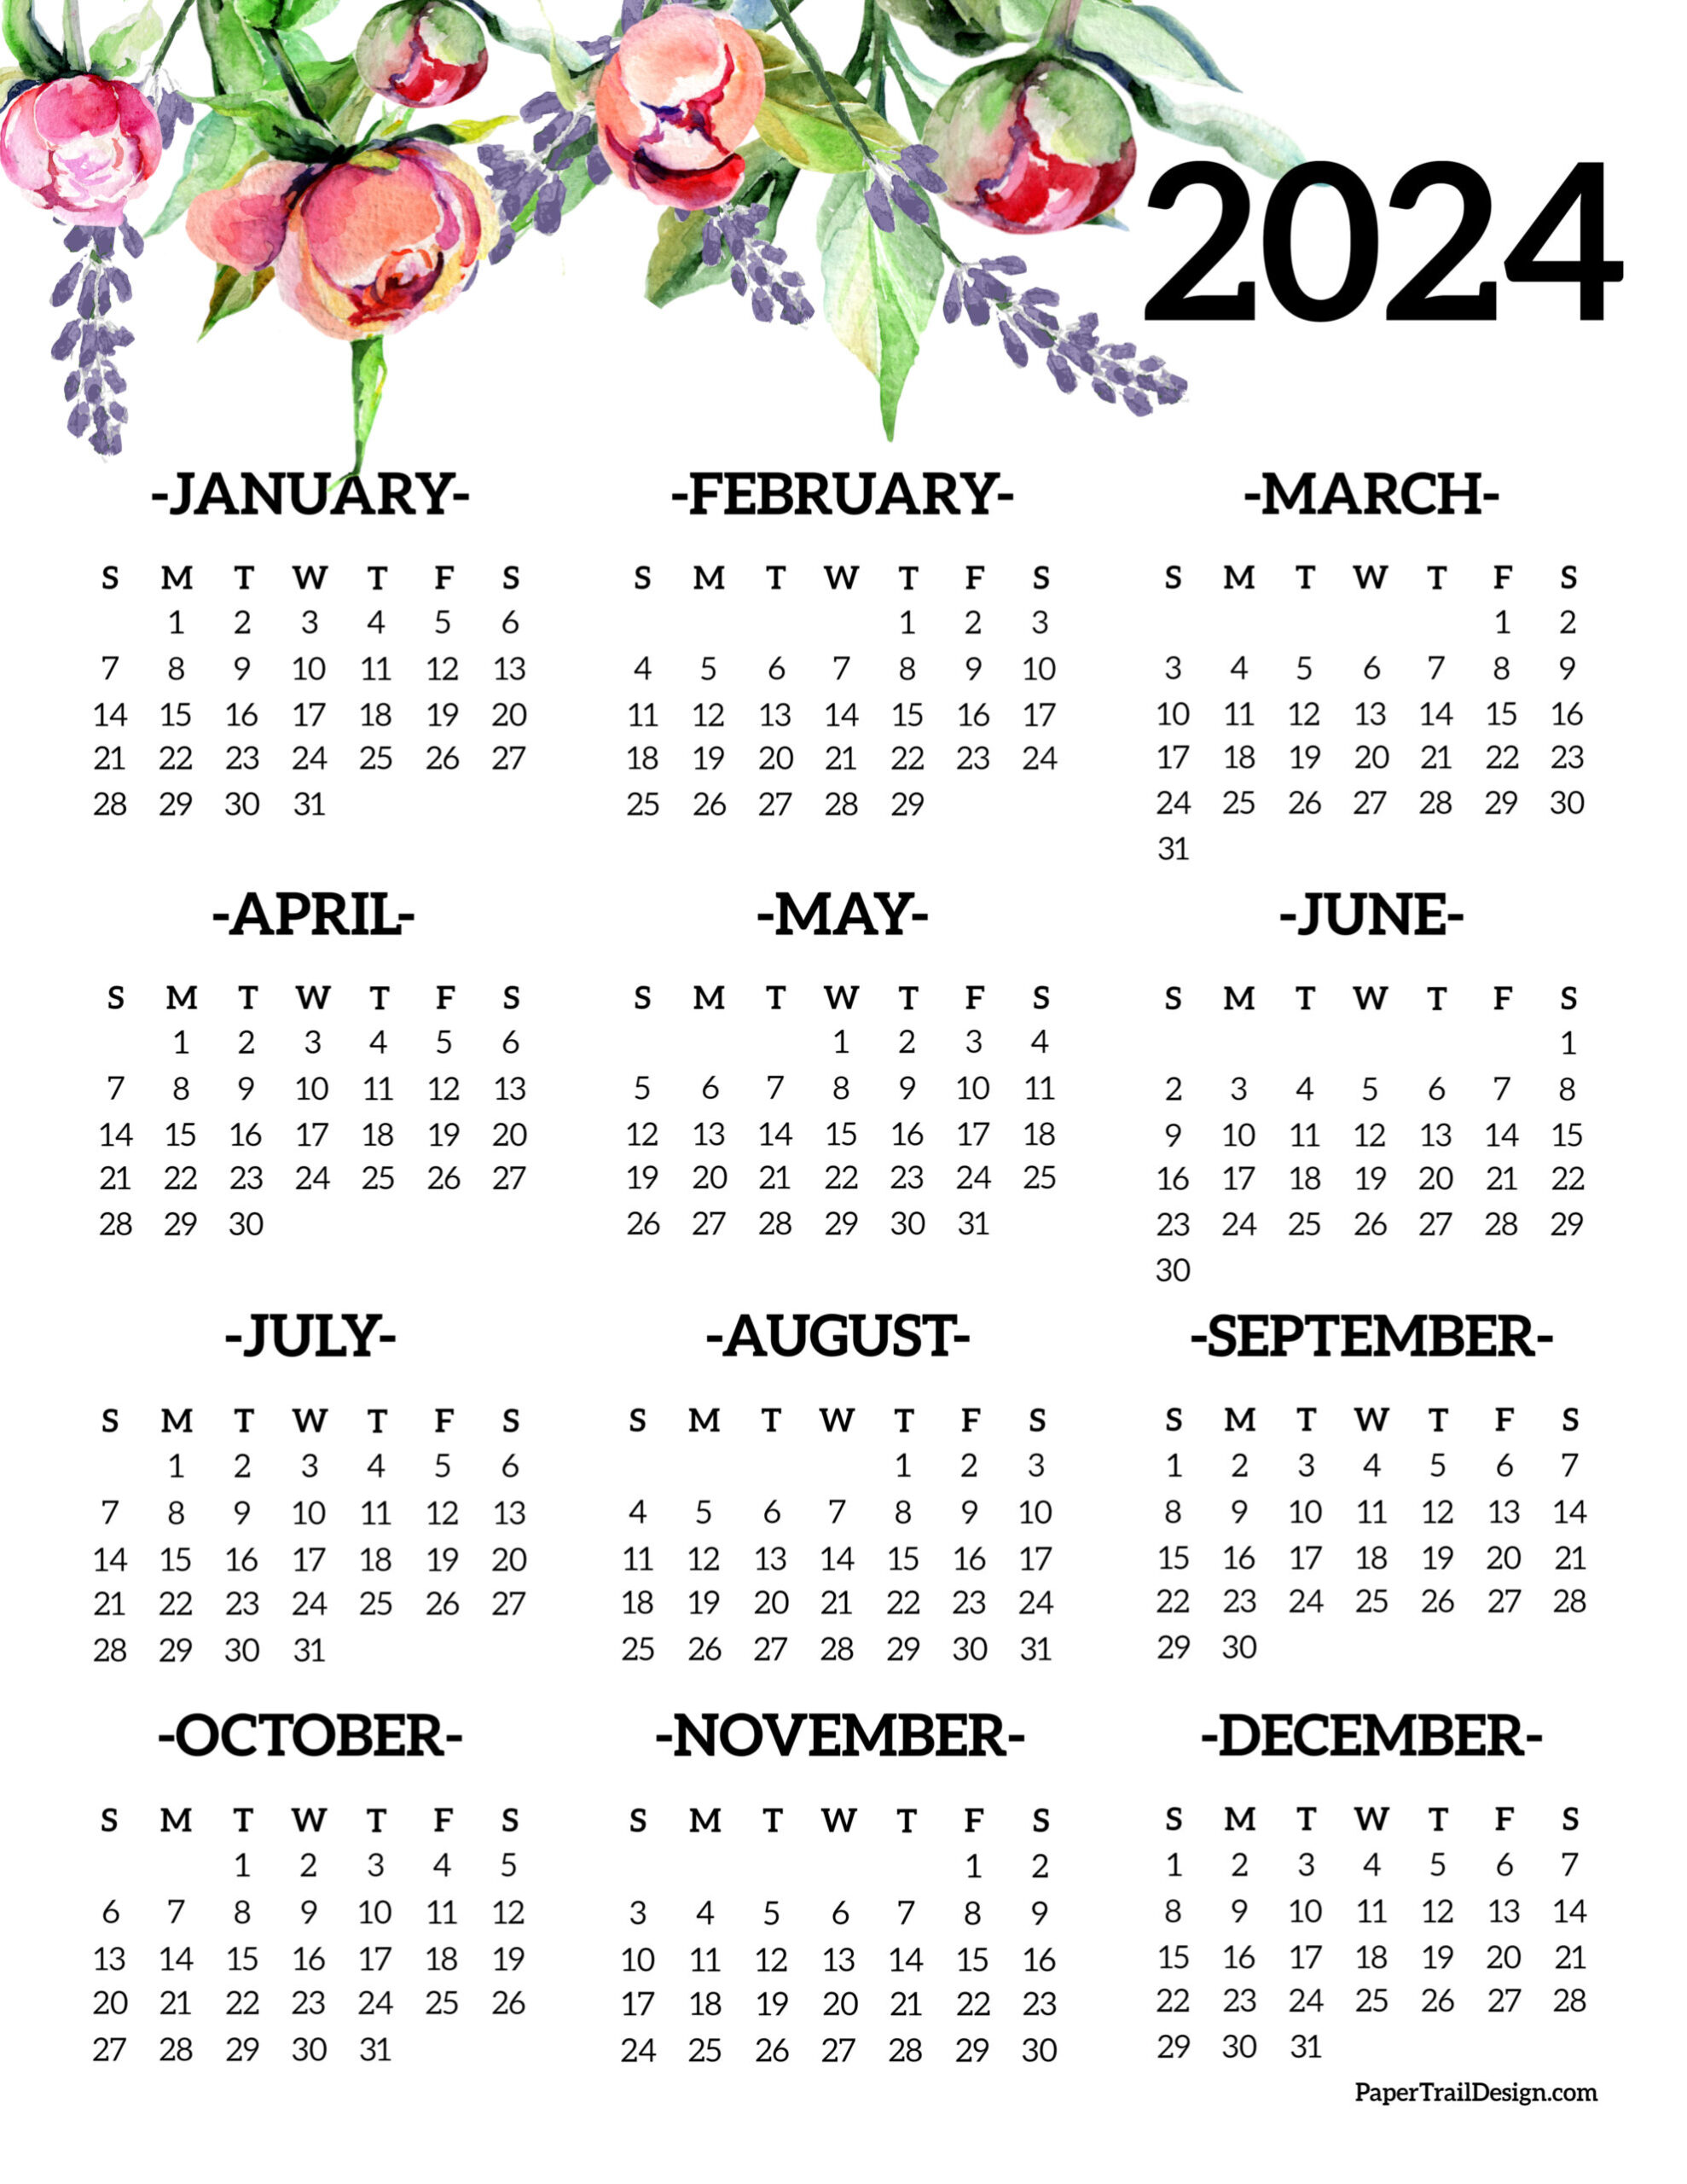 Calendar 2024 Printable One Page - Paper Trail Design for Free Printable 1 Page 2024 Calendar